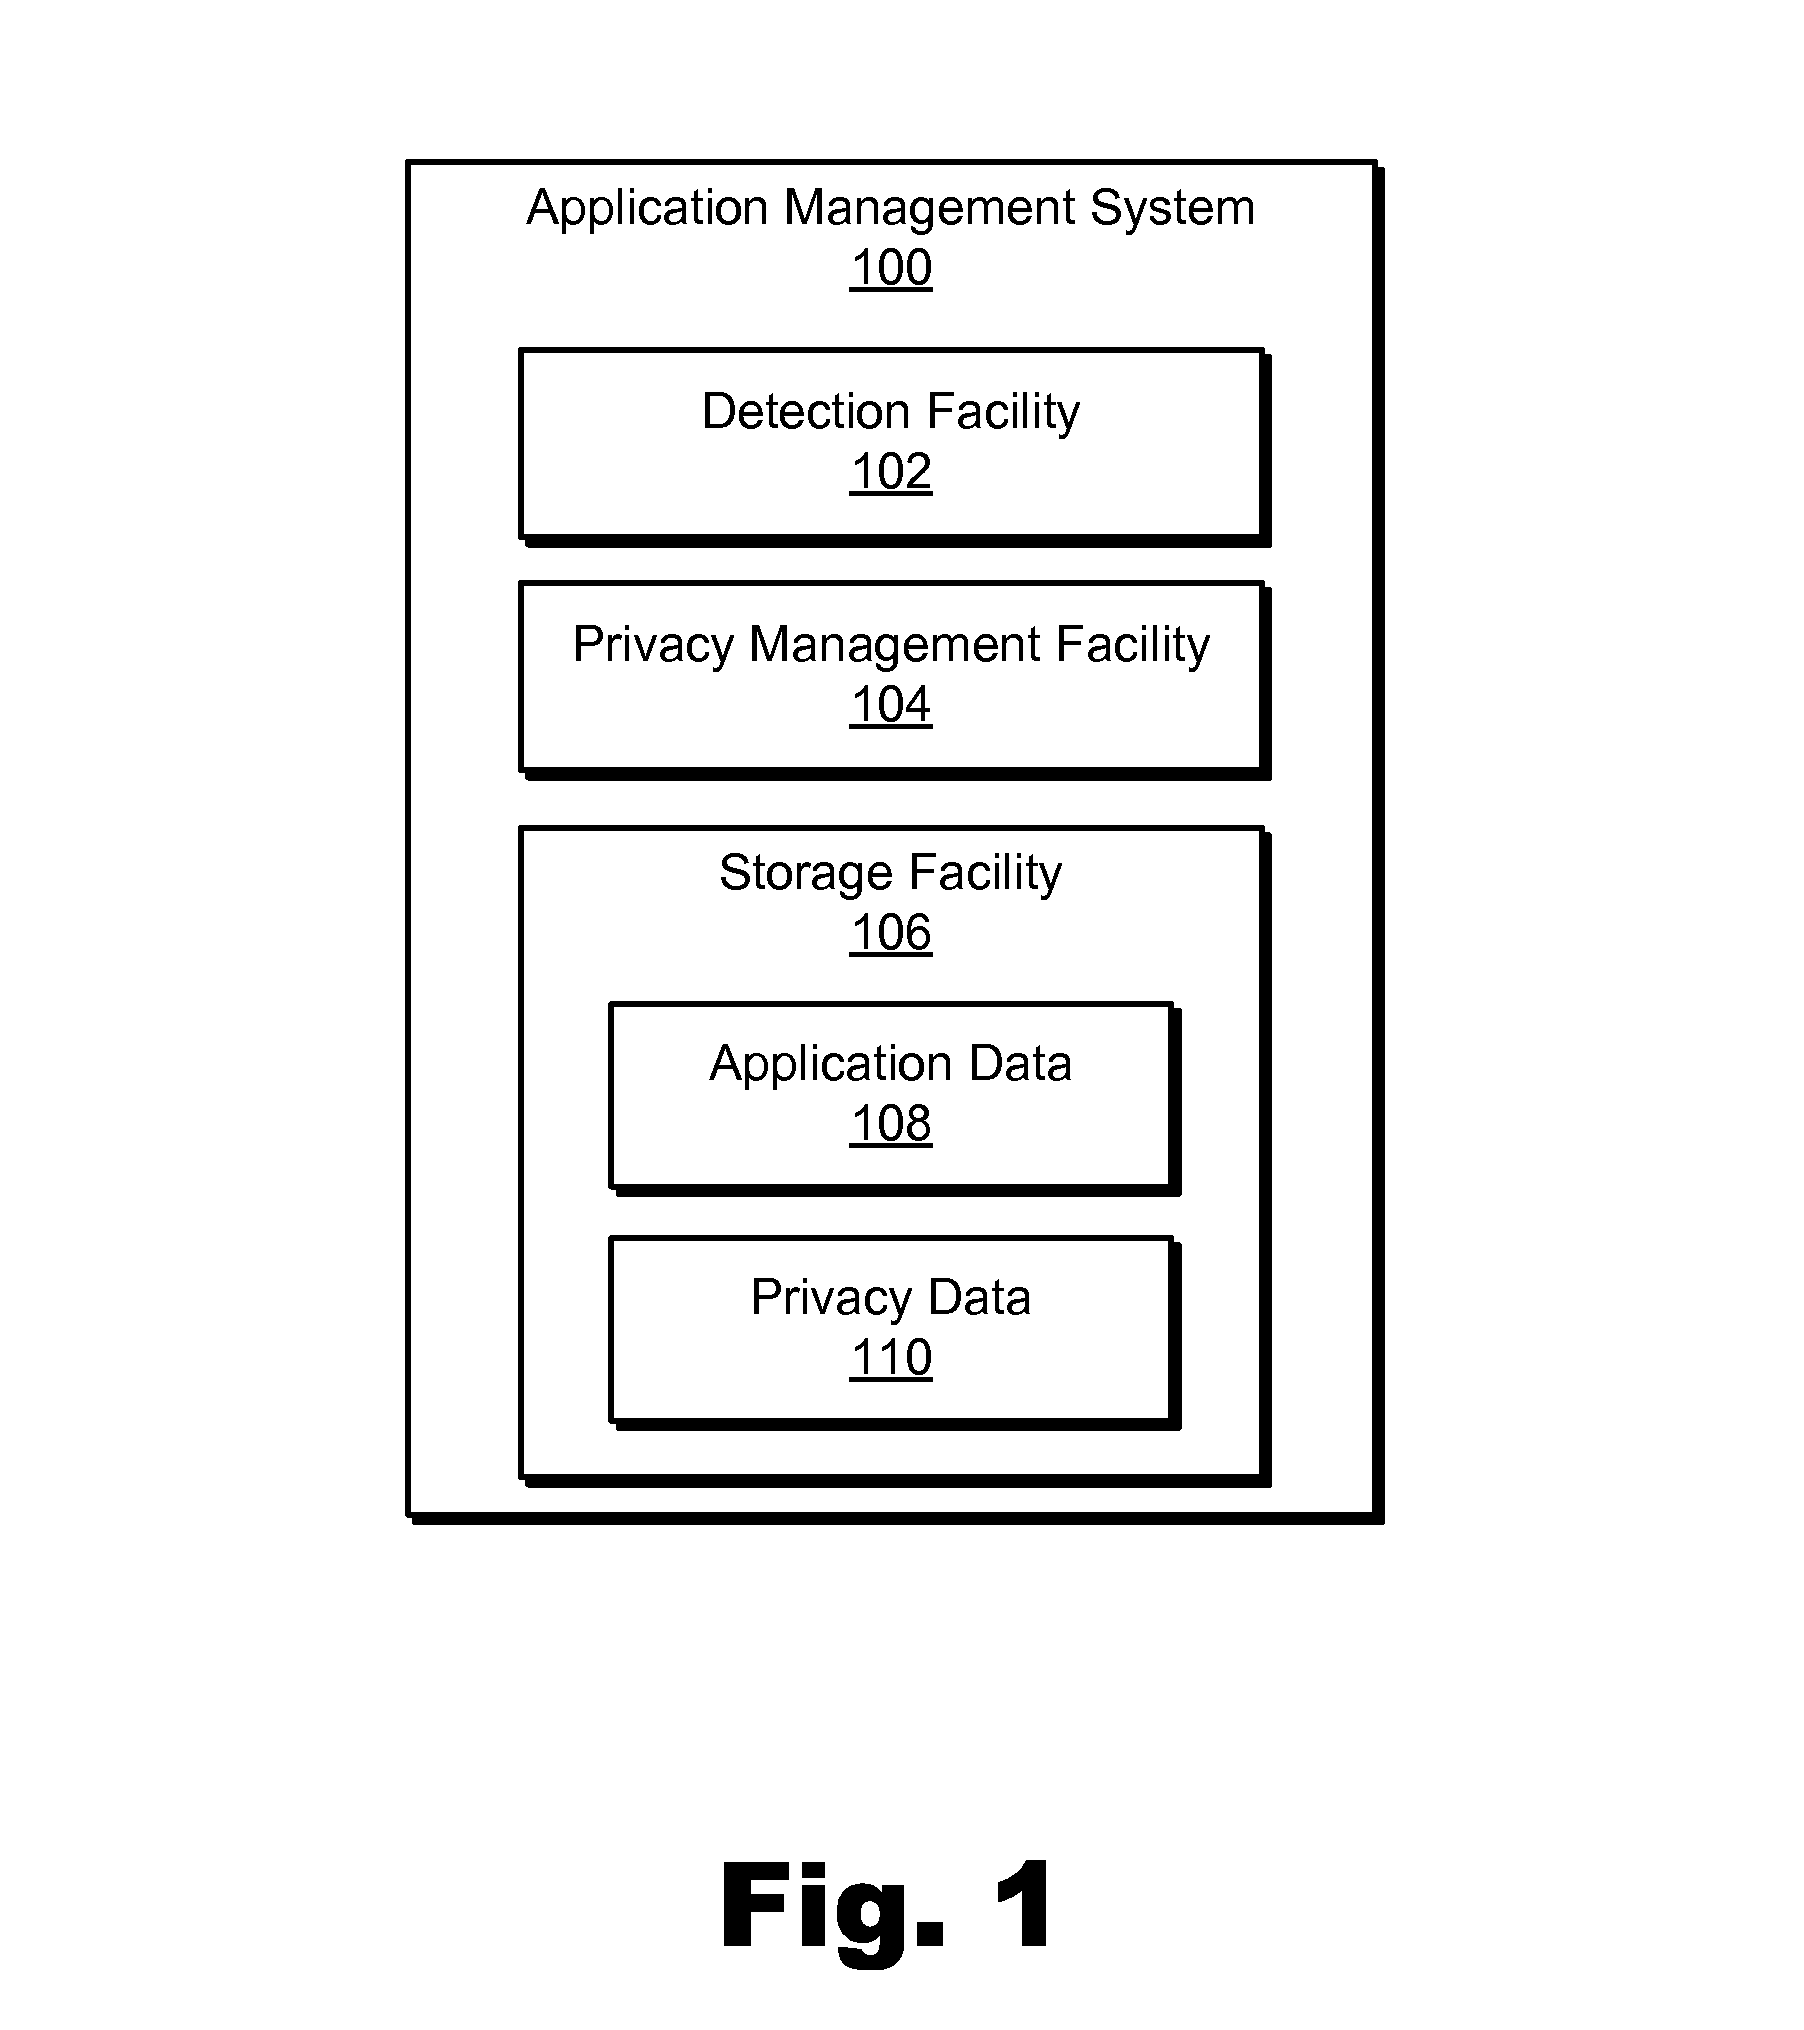 Methods and systems for providing a notification of a compliance level of an application with respect to a privacy profile associated with a user